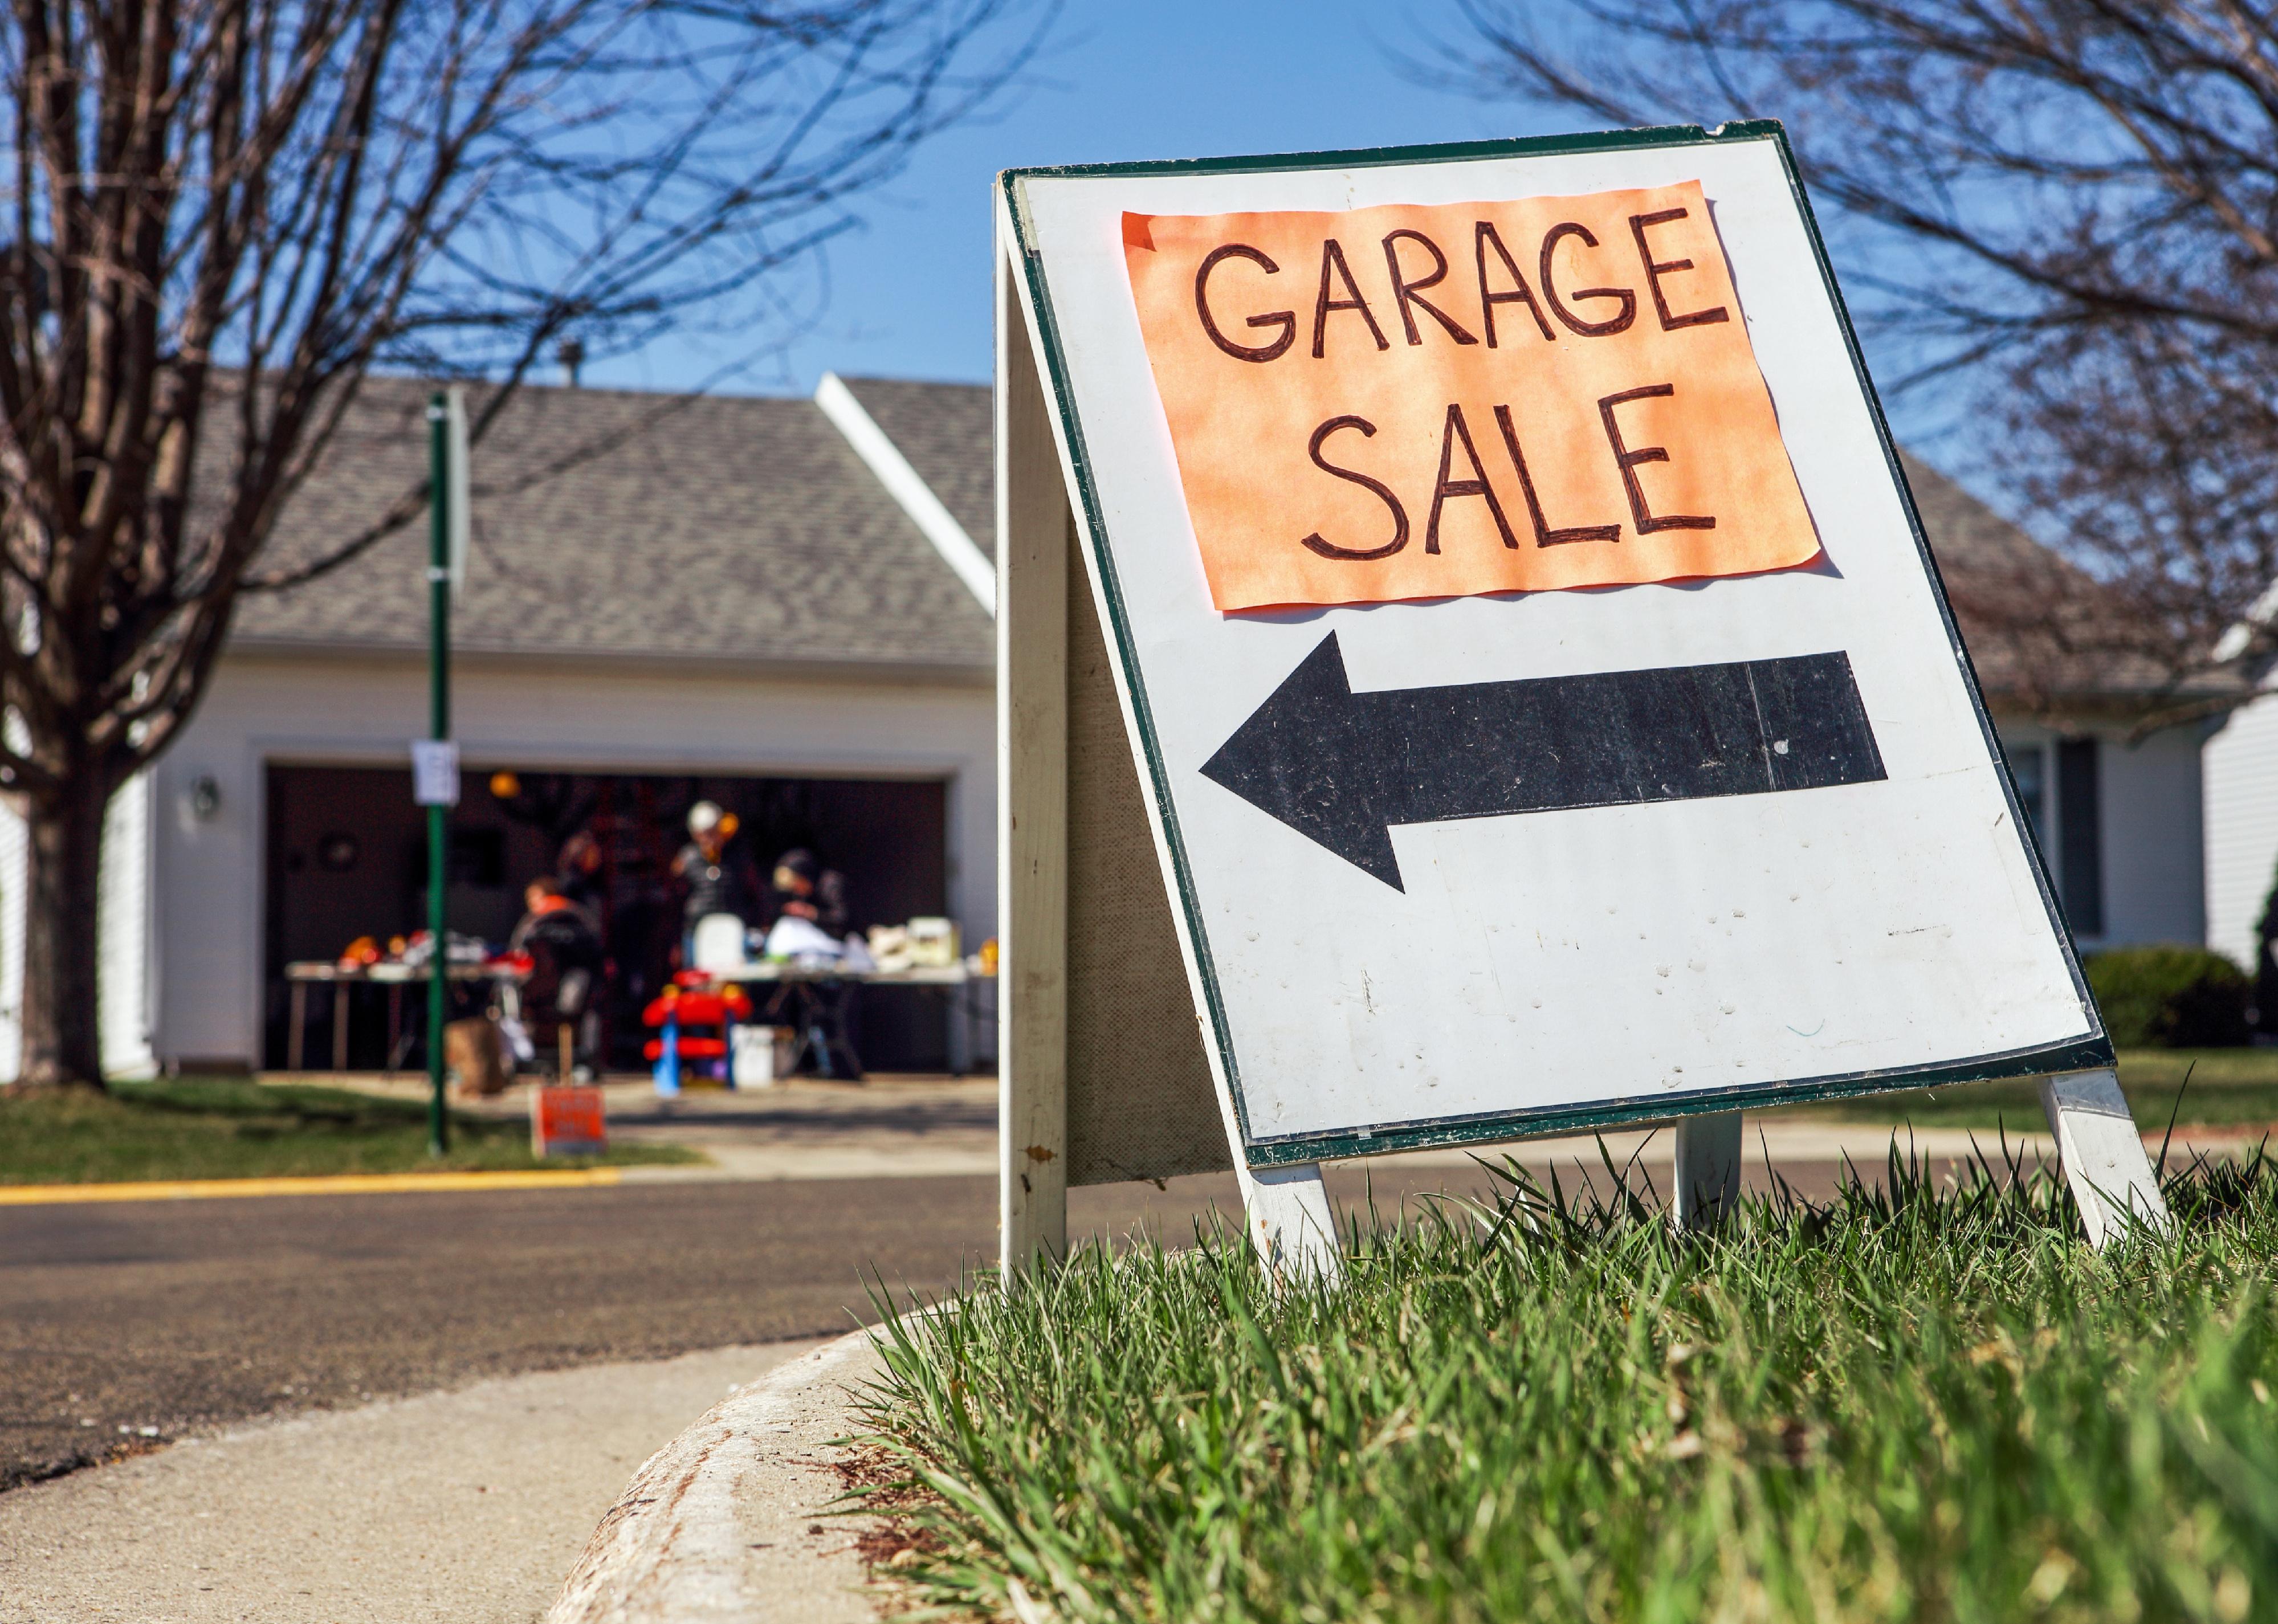 Garage sale sign on the lawn of a suburban home.